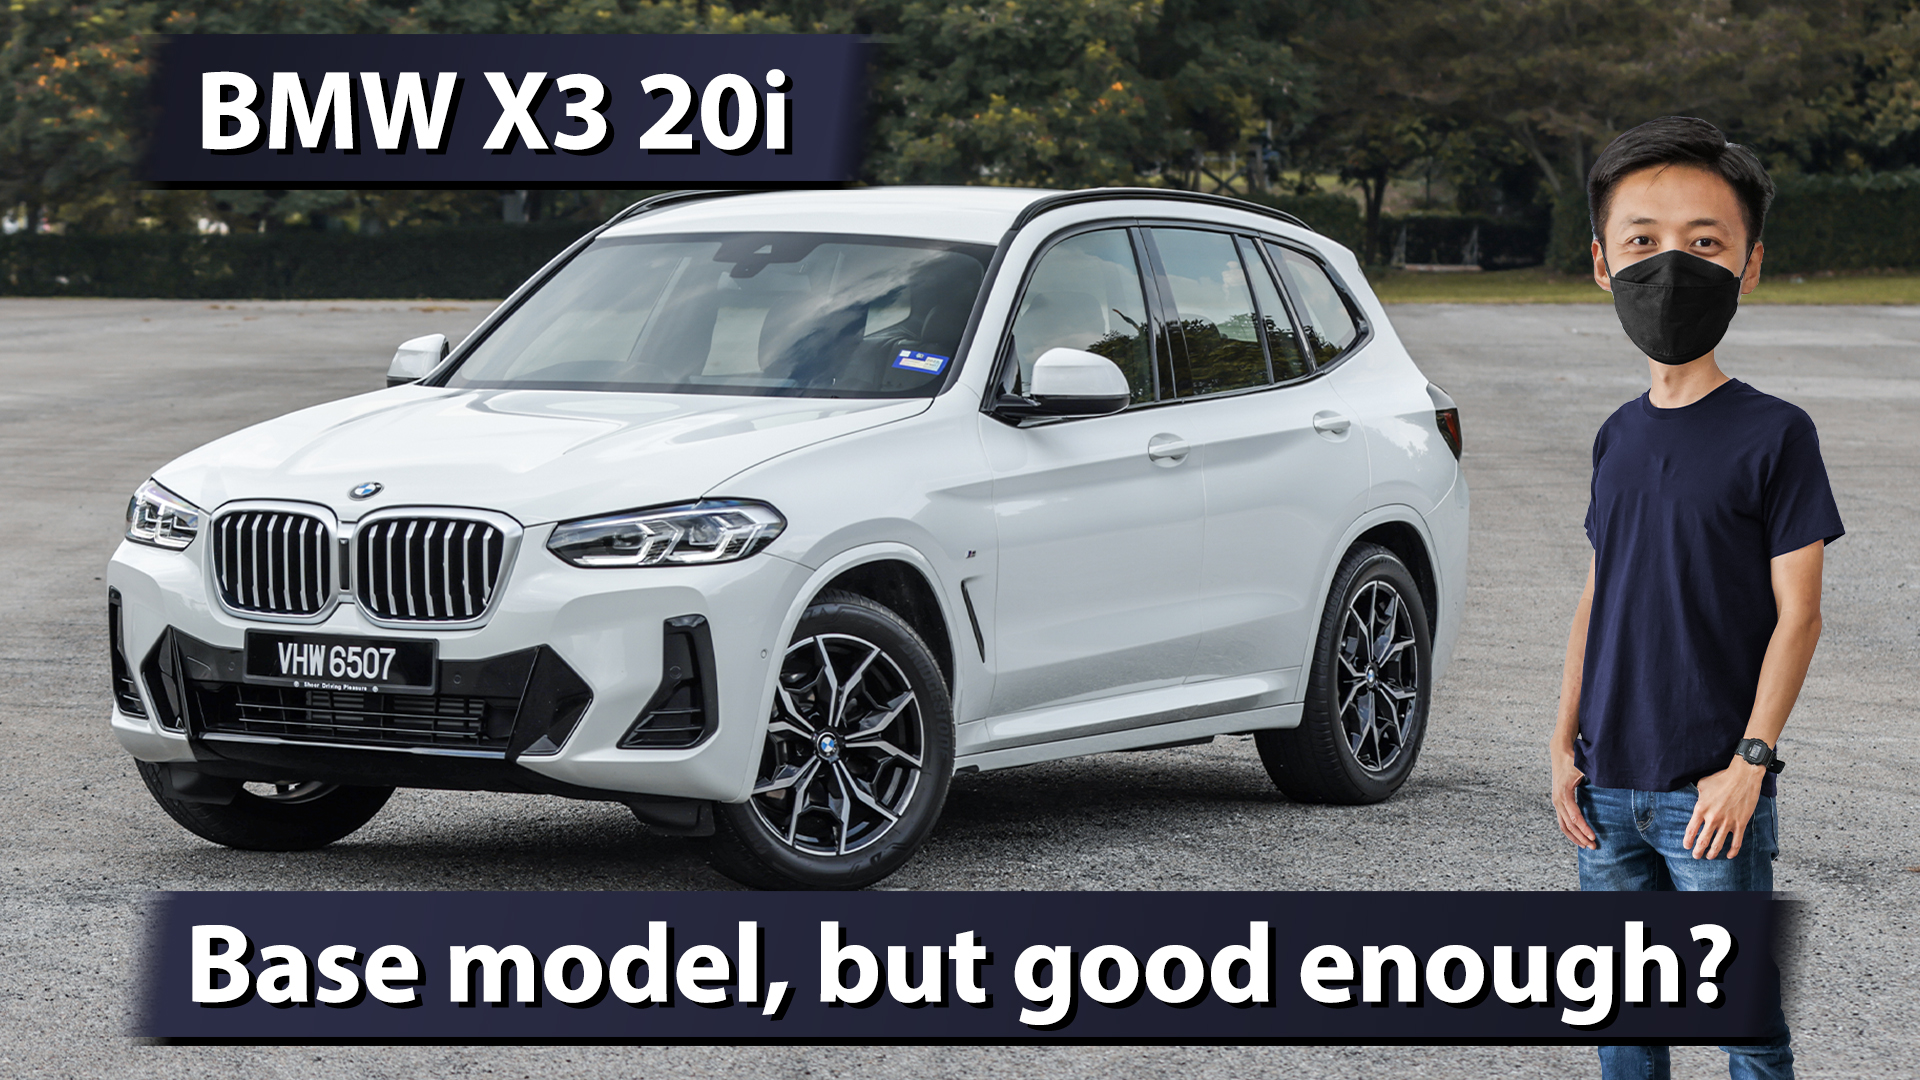 BMW X3 sDrive20i G01 LCI facelift review - is it good enough for RM297k?